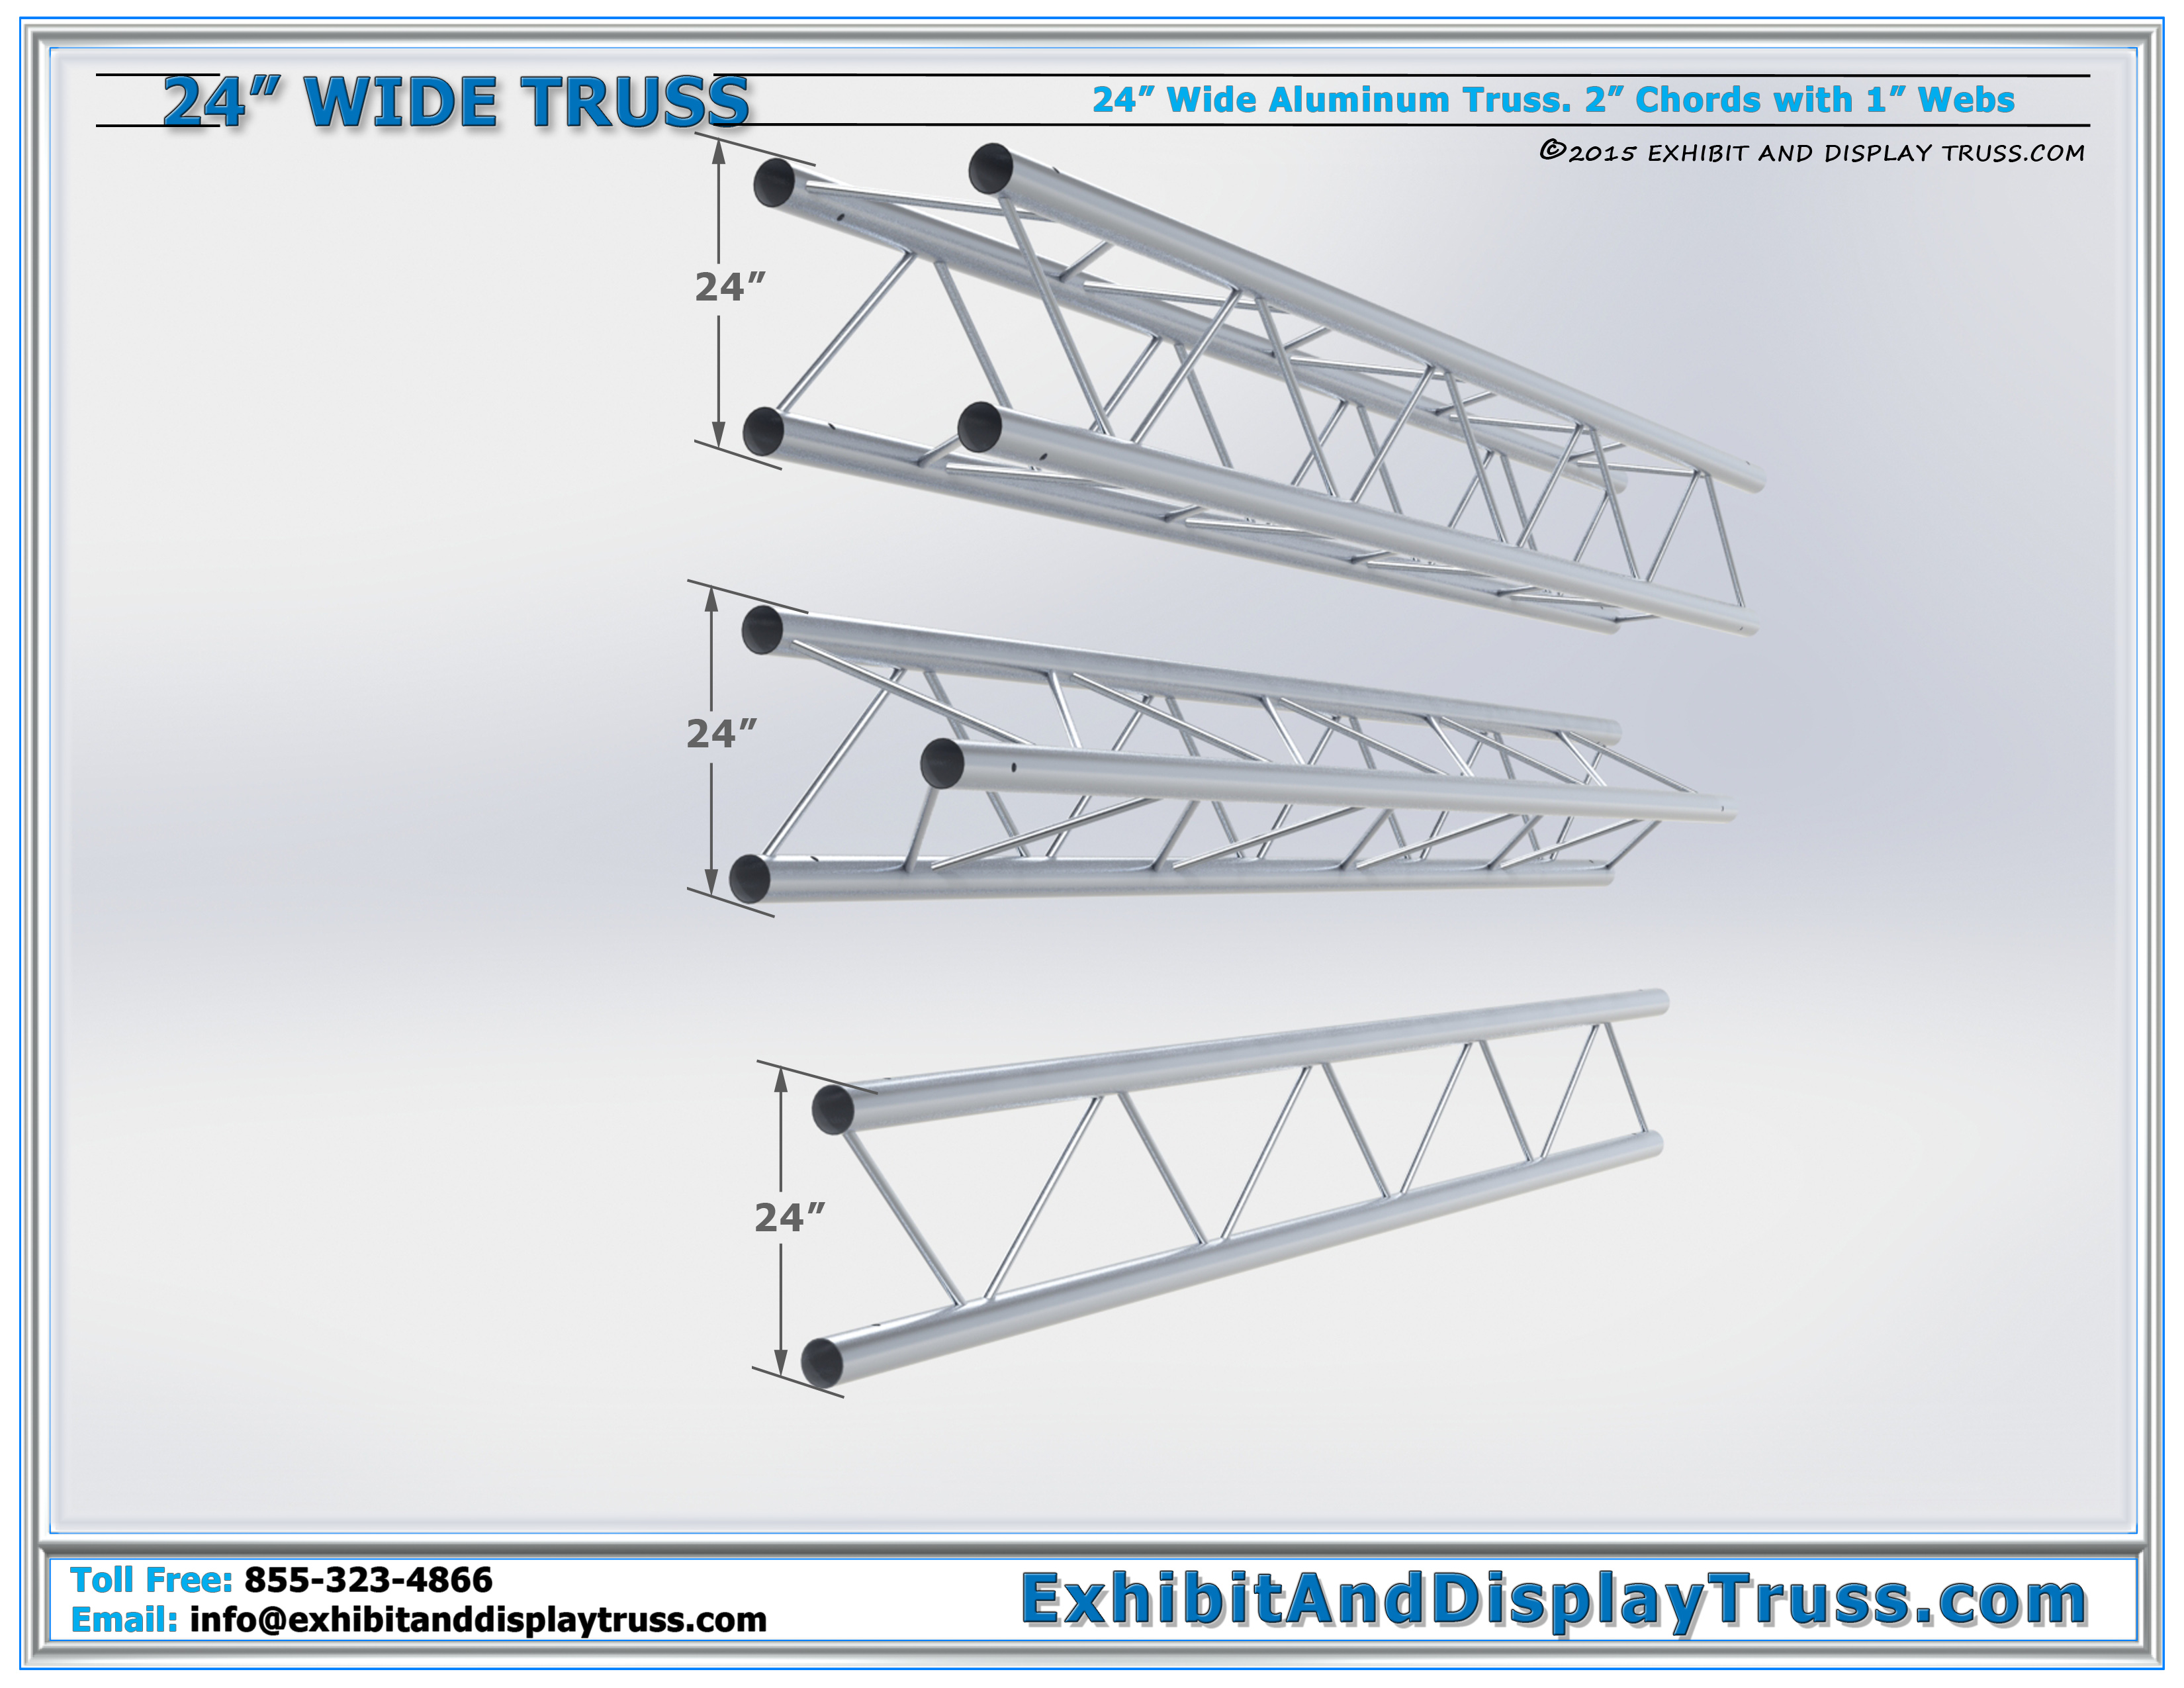 24” Wide Aluminum Truss| Stage Lighting, Touring and Rigging Truss Stocked In: Box / Square, Triangle and Flat / Ladder